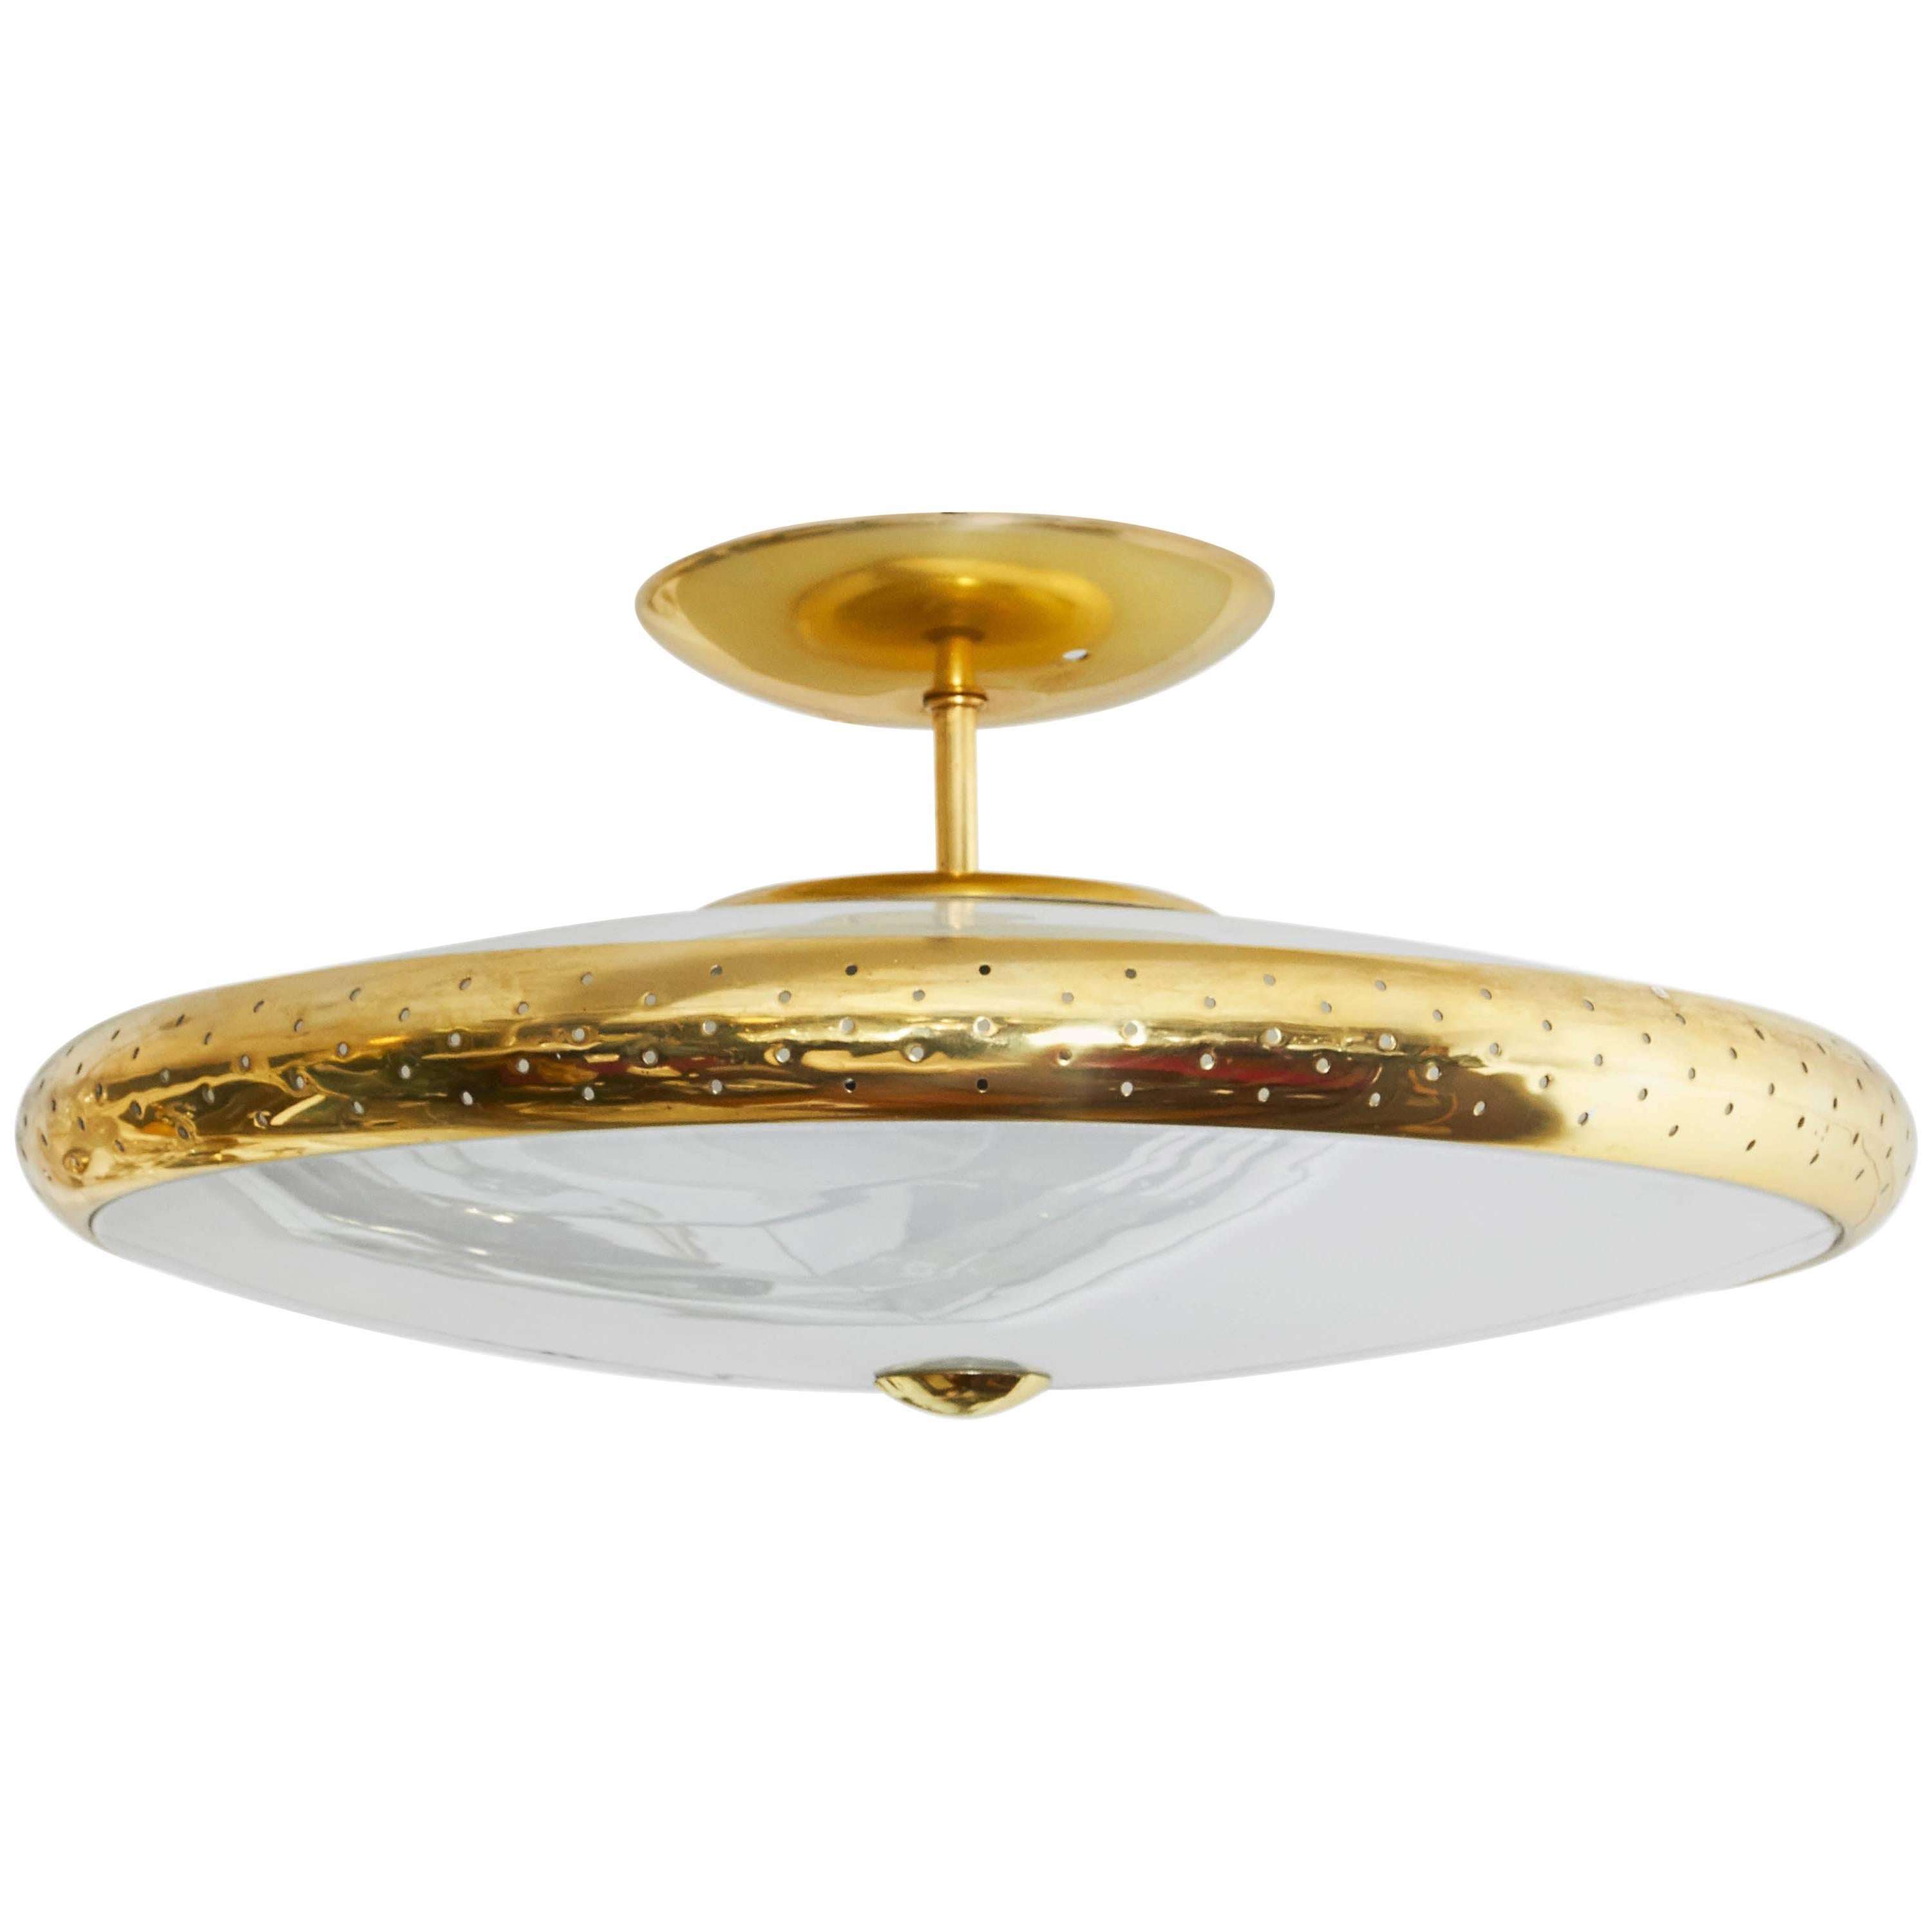 Mid-Century Modern Perforated Brass and Frosted Glass Saucer Pendant